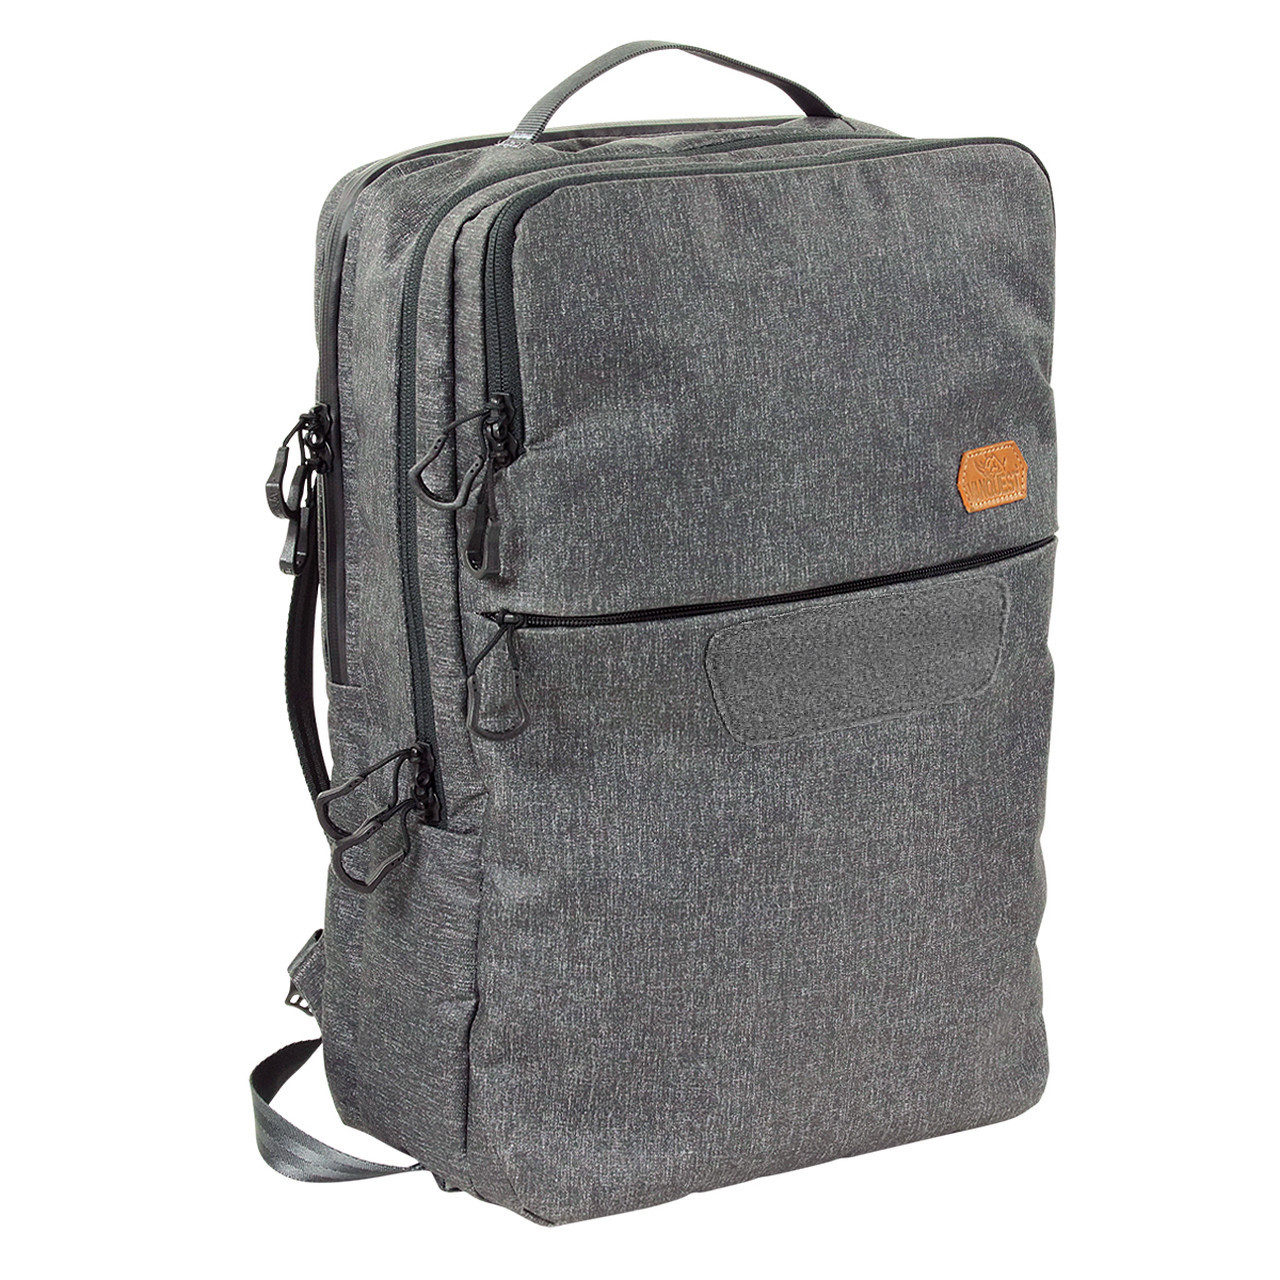 ADDAX-25 Backpack - Vanquest Gear